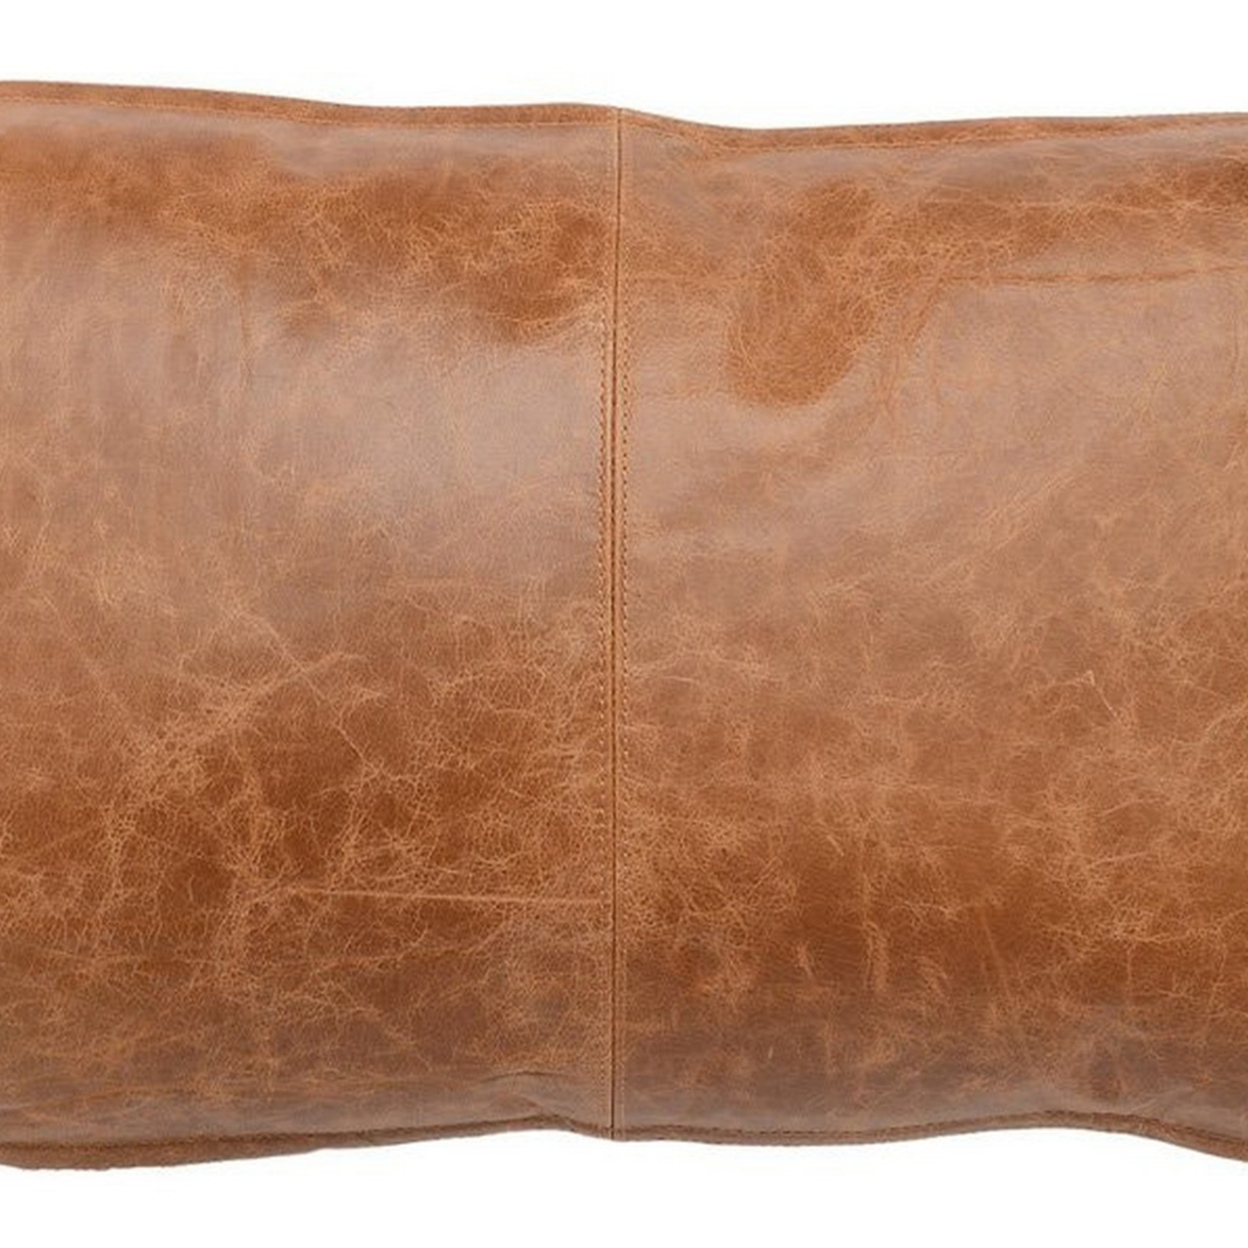 Rectangular Leatherette Throw Pillow With Stitched Details, Small, Brown- Saltoro Sherpi